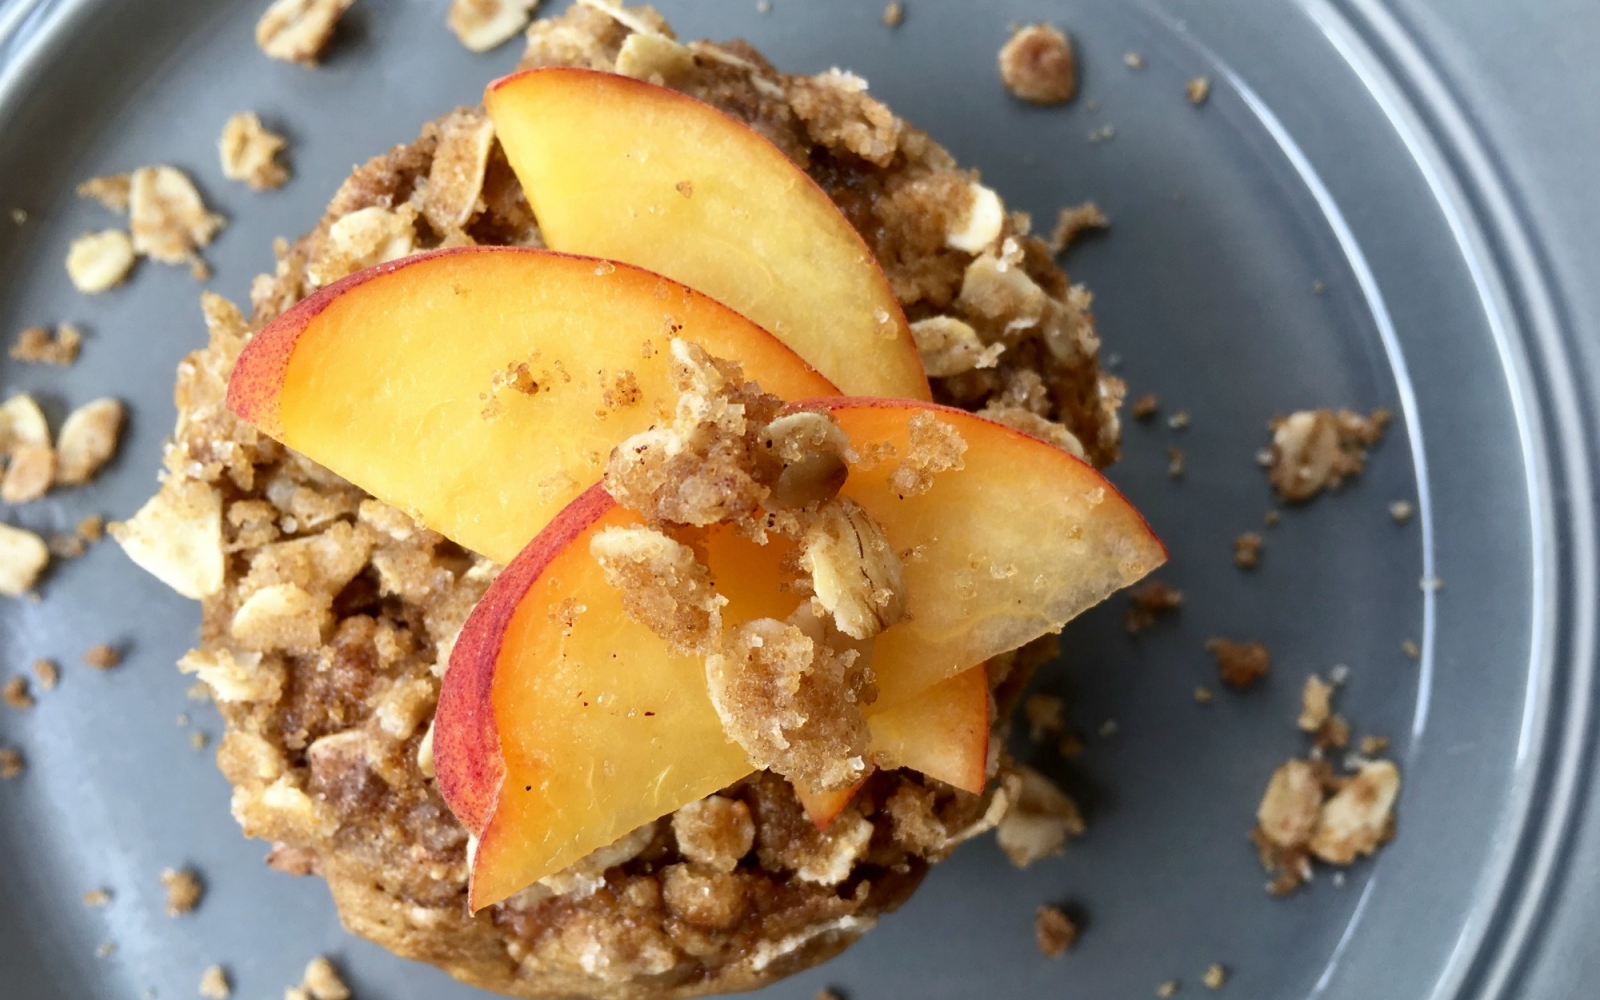 Vegan peach cobbler muffins with toasted oats and brown sugar sprinkles [Vegan]